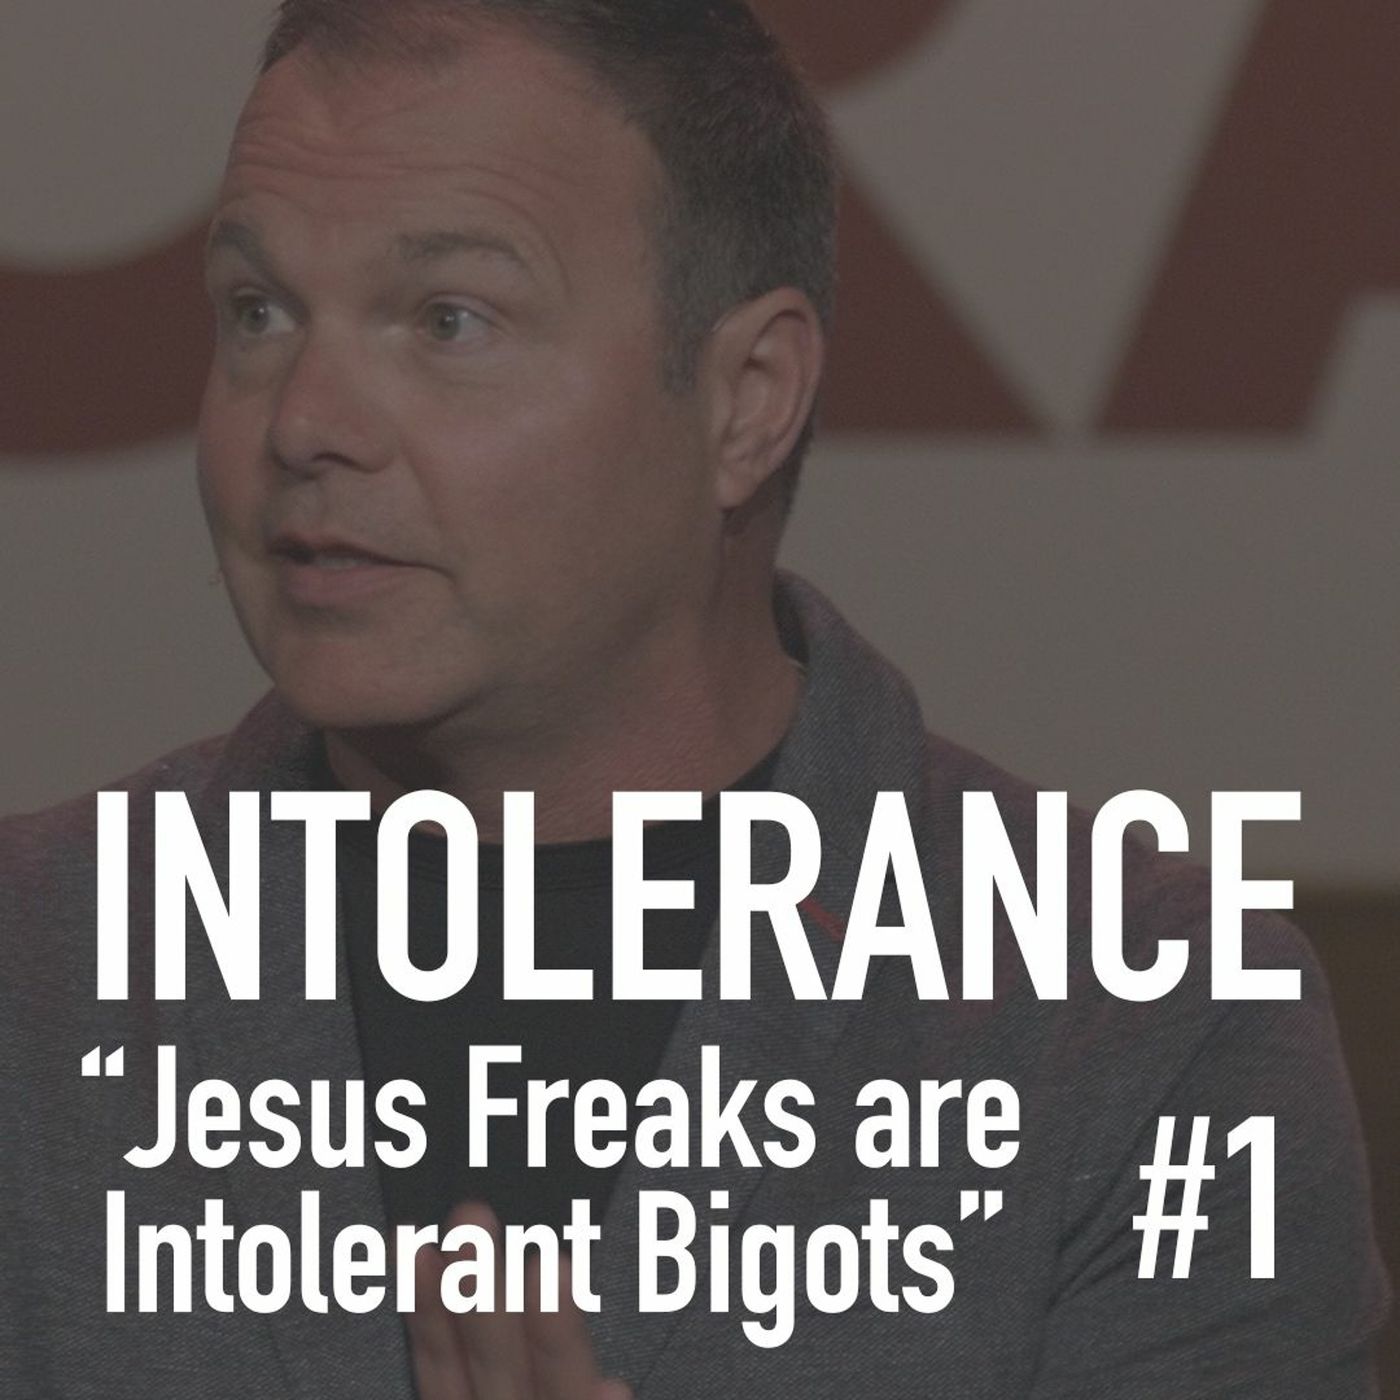 Christians Might Be Crazy #1 - Intolerance